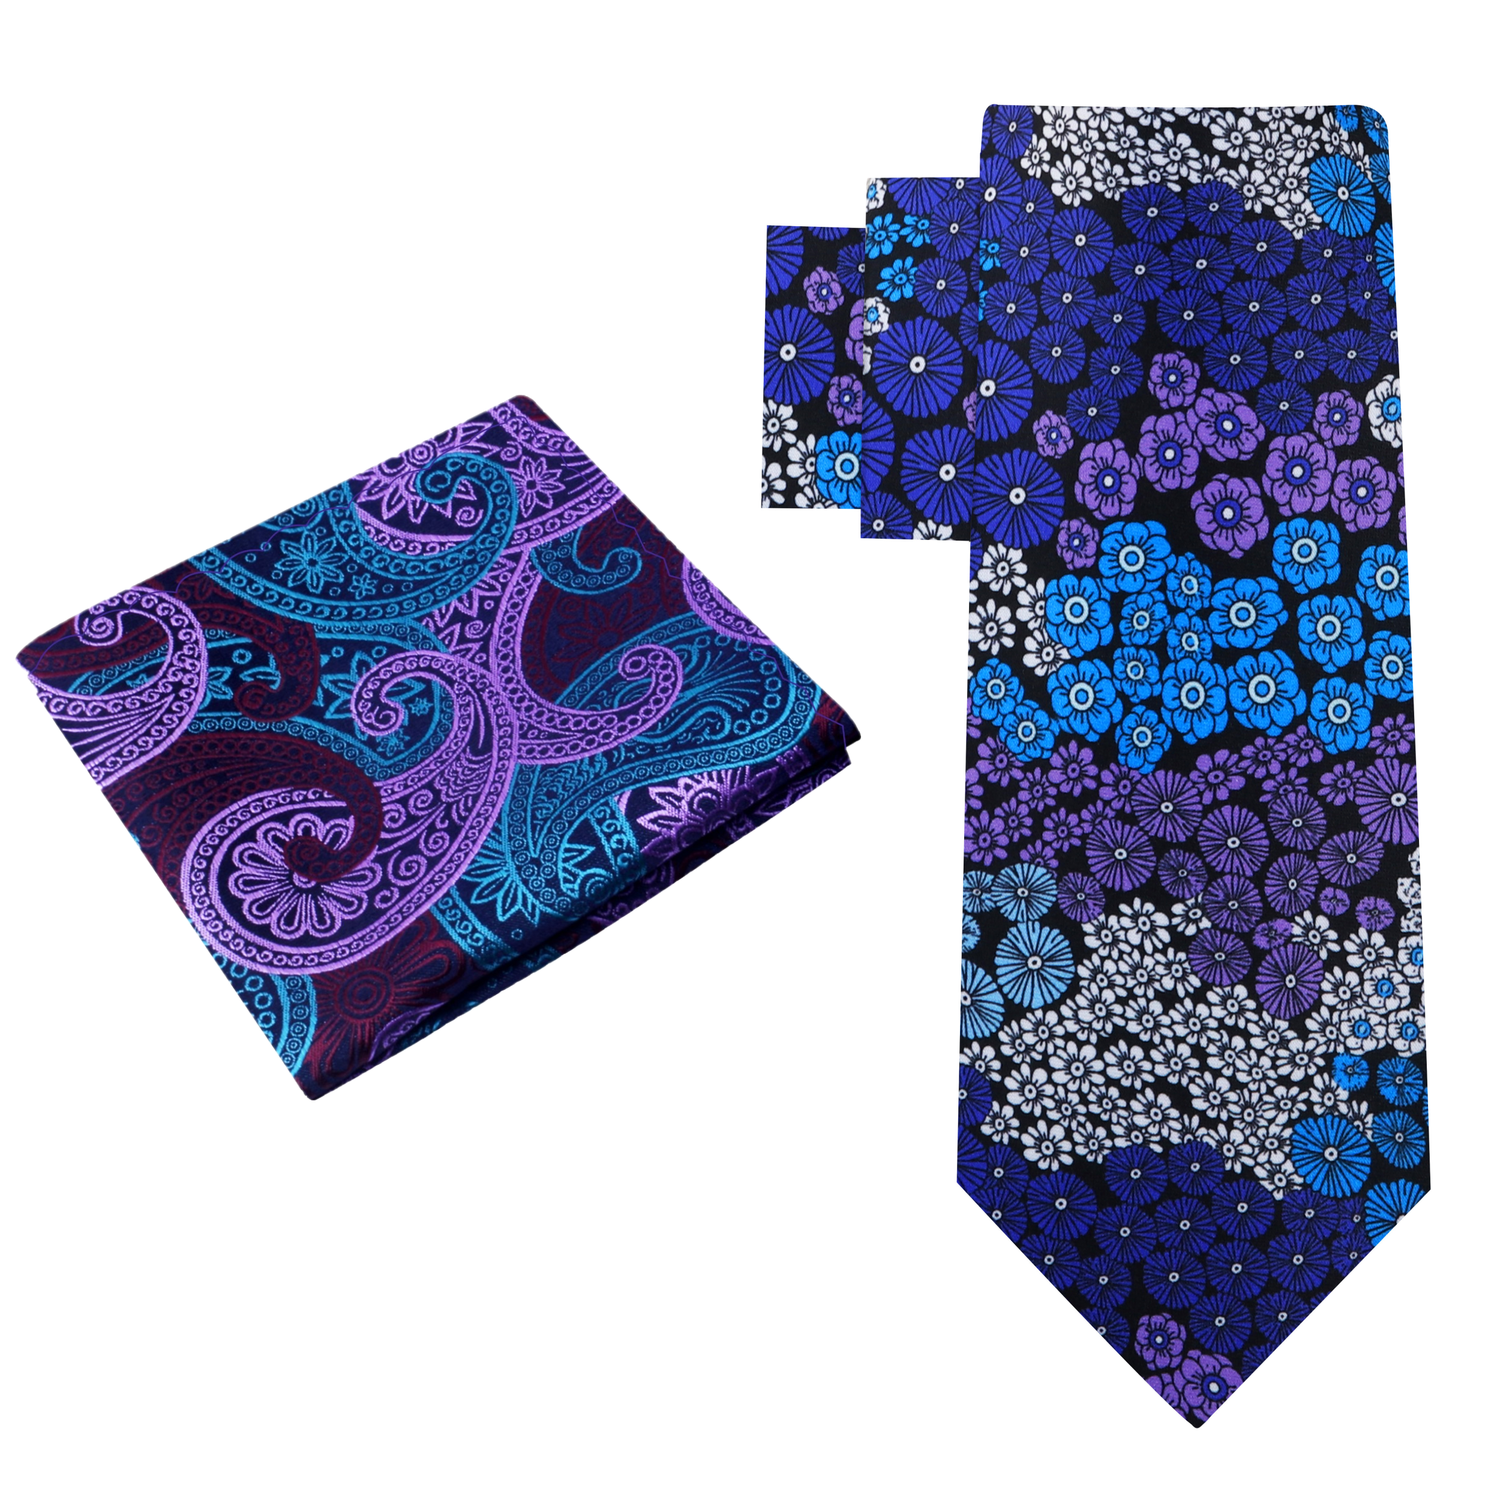 Alt View: Blue, Purple and White Flowers Necktie and Accenting Blue and Purple Paisley Square